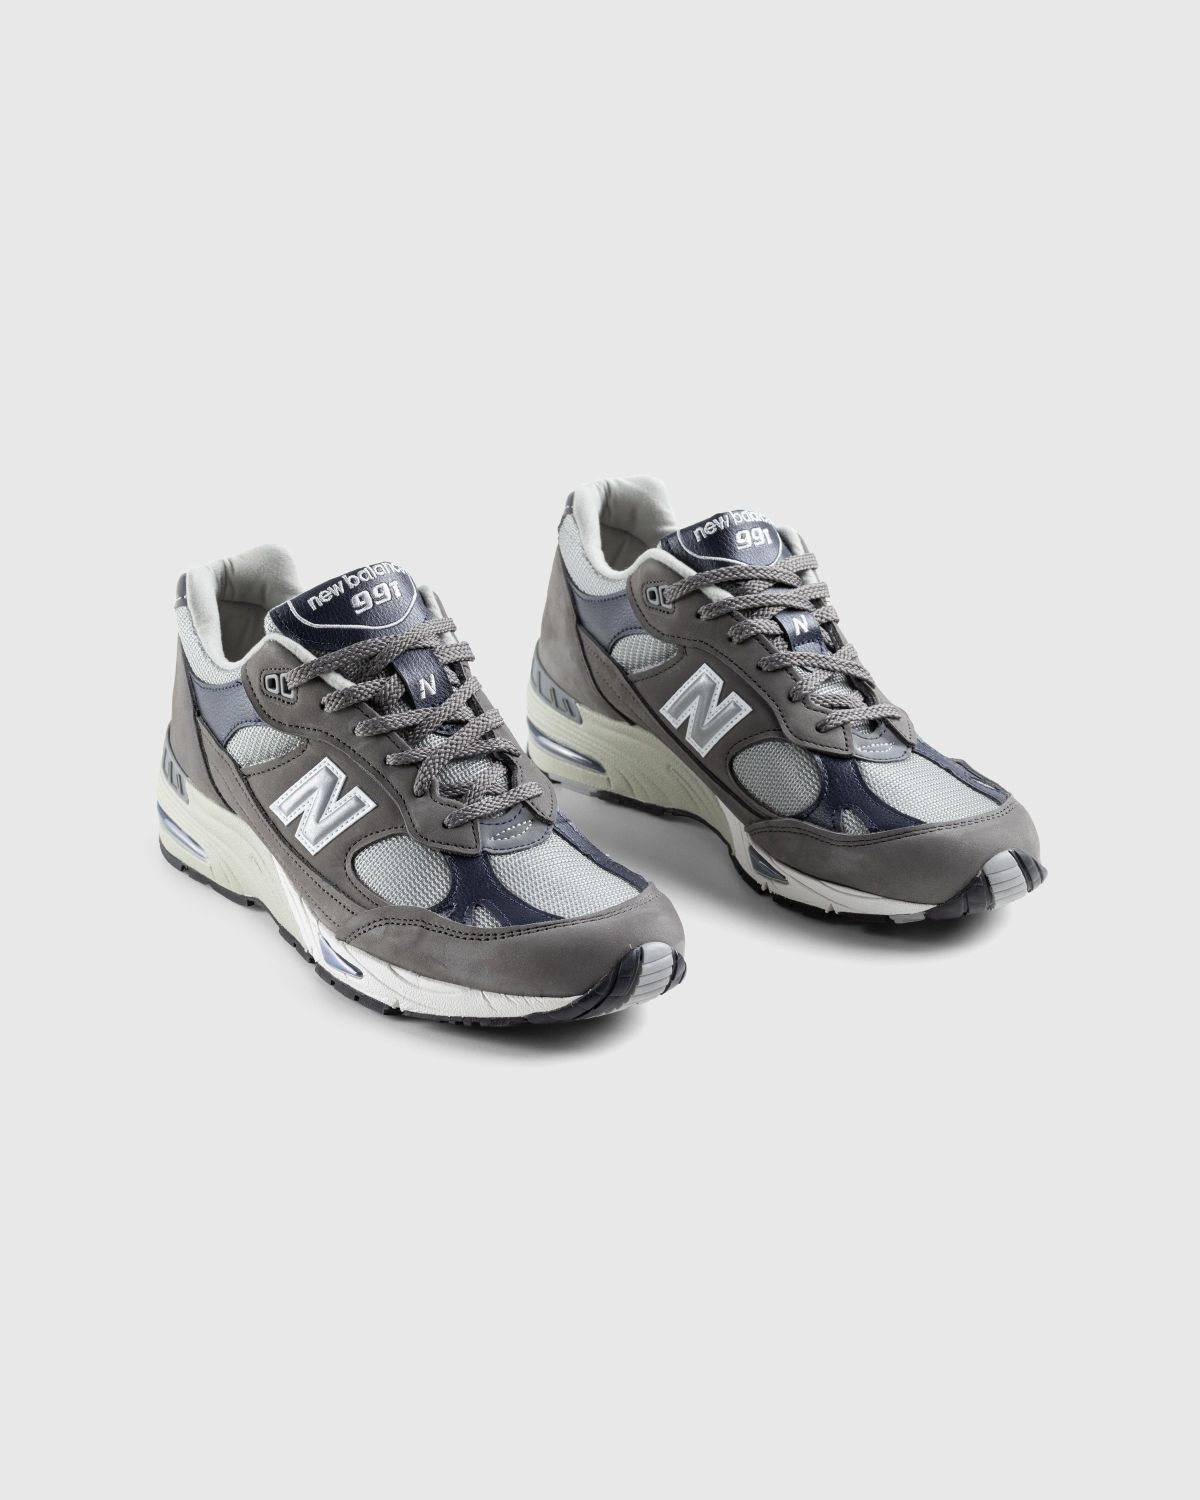 New Balance – M991GNS Grey/Navy - Sneakers - Grey - Image 3